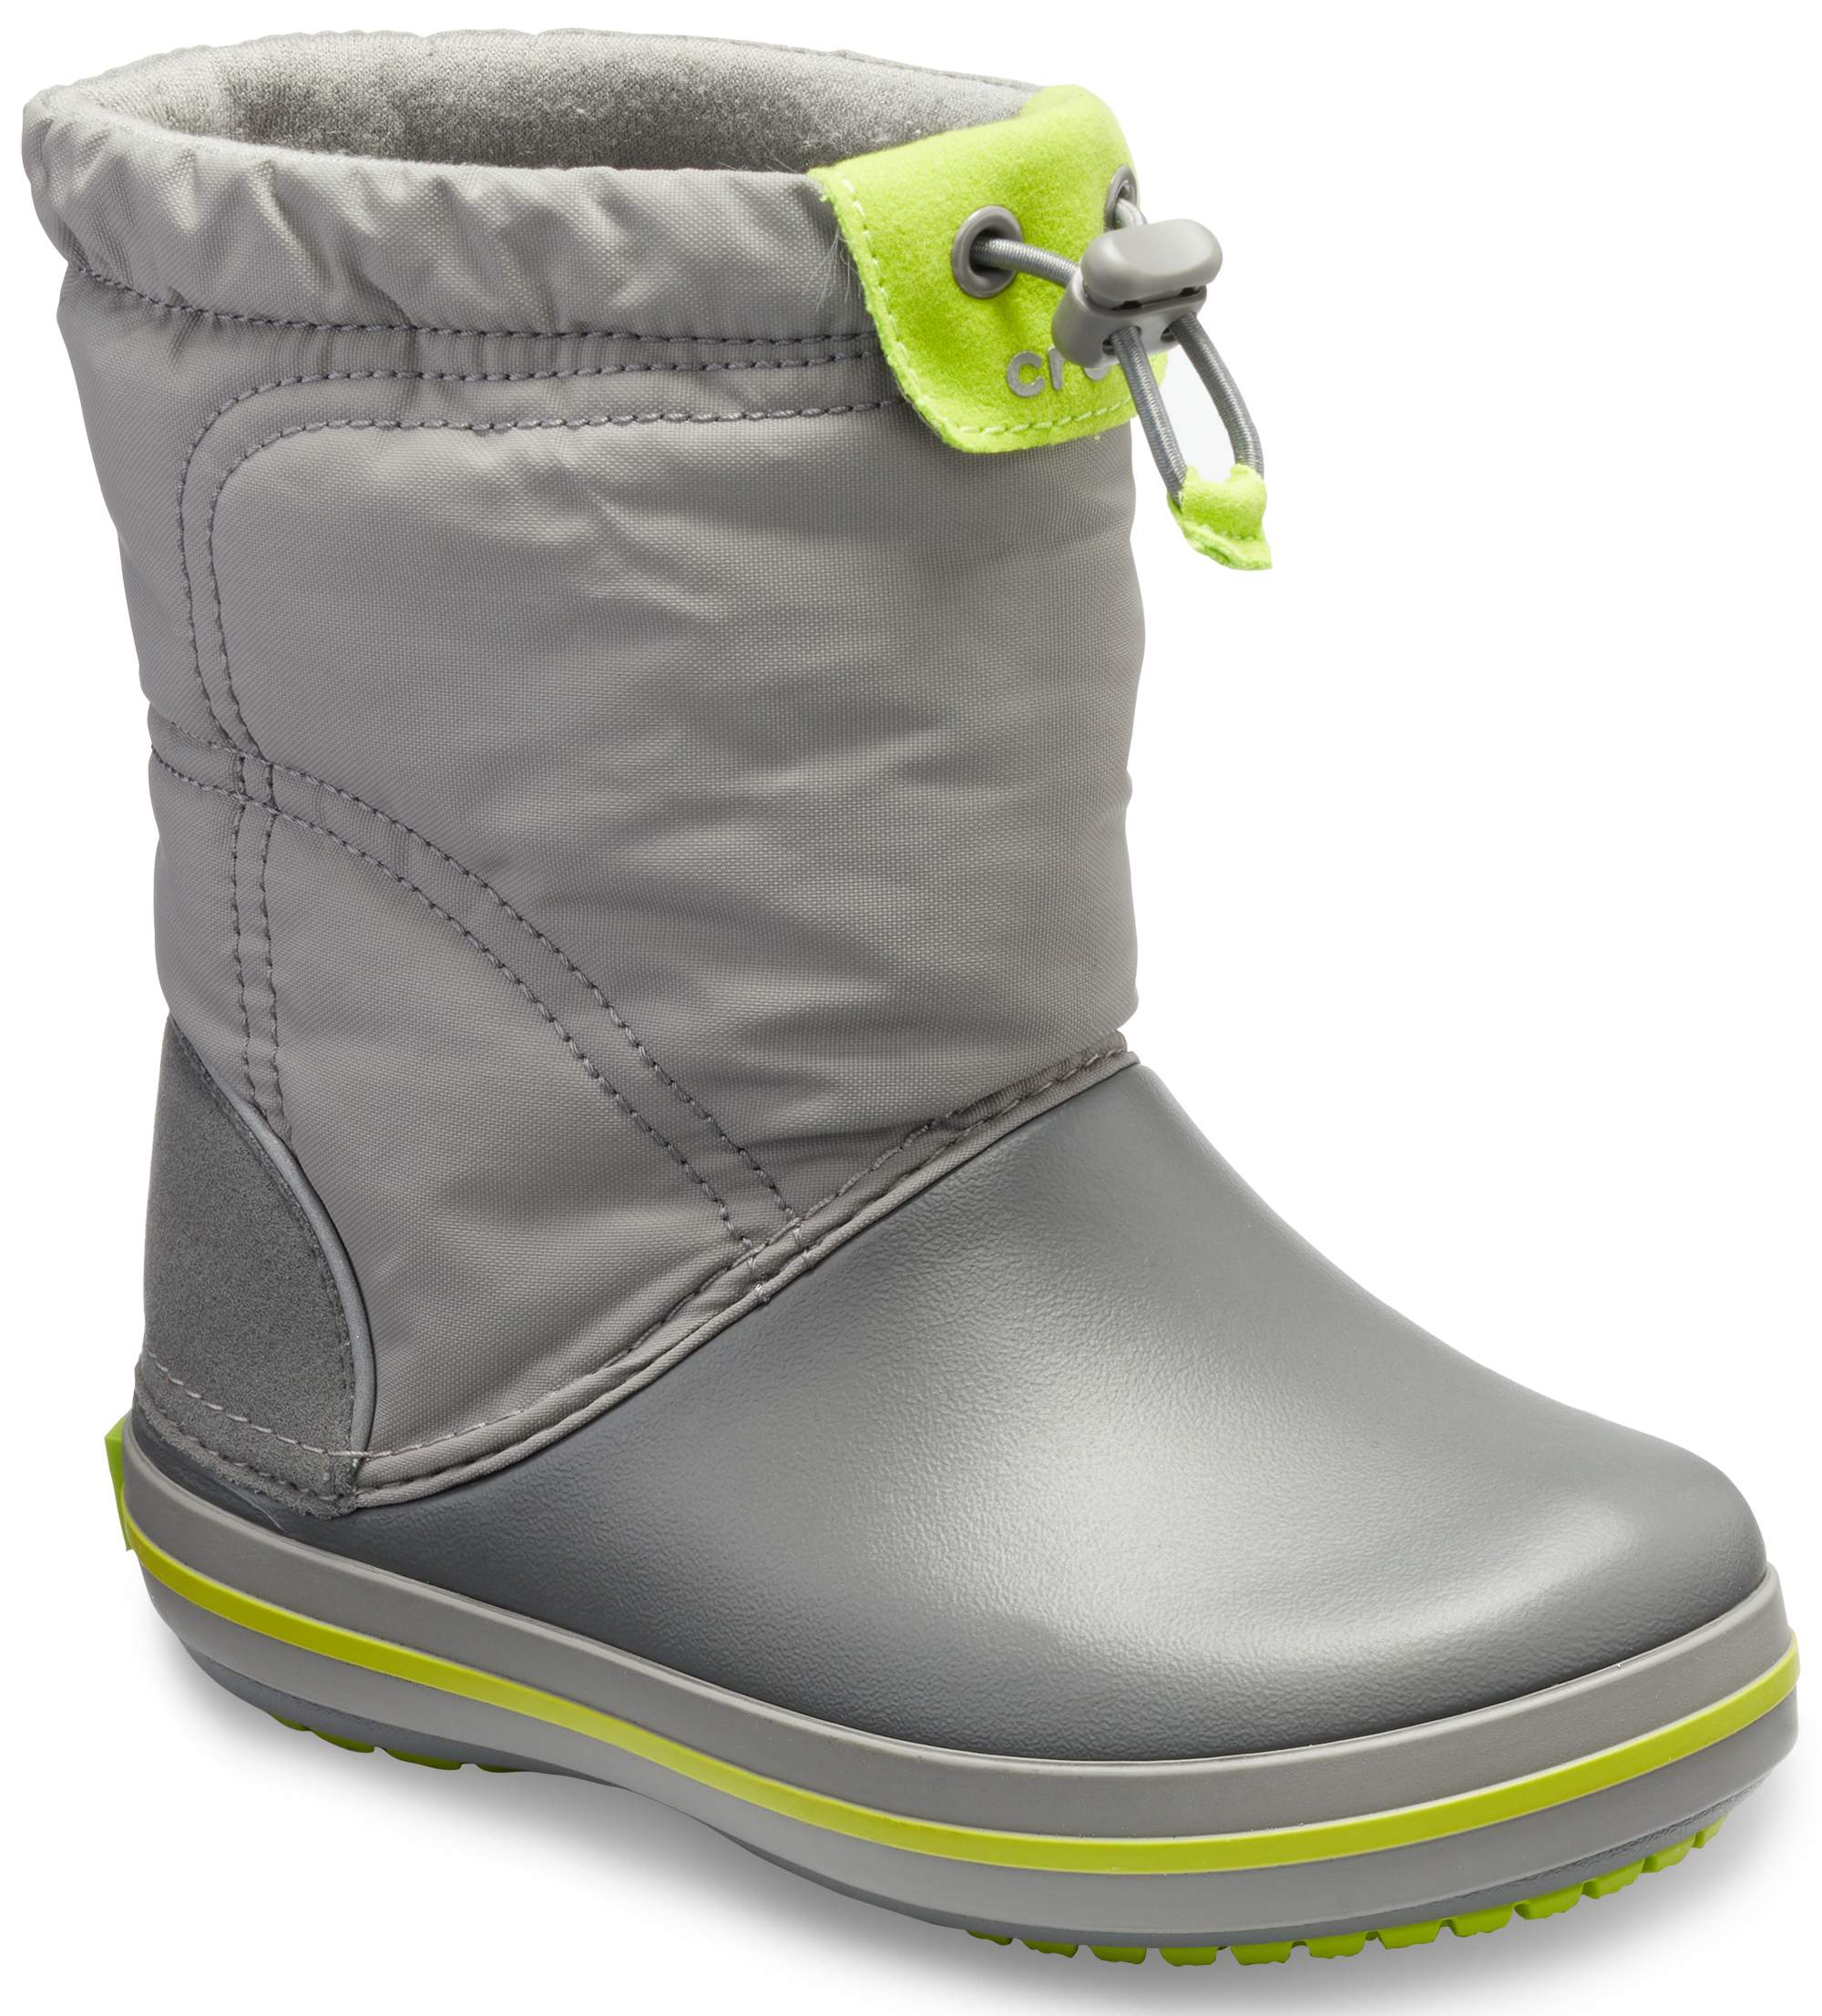 crocs lodgepoint kid's winter boots